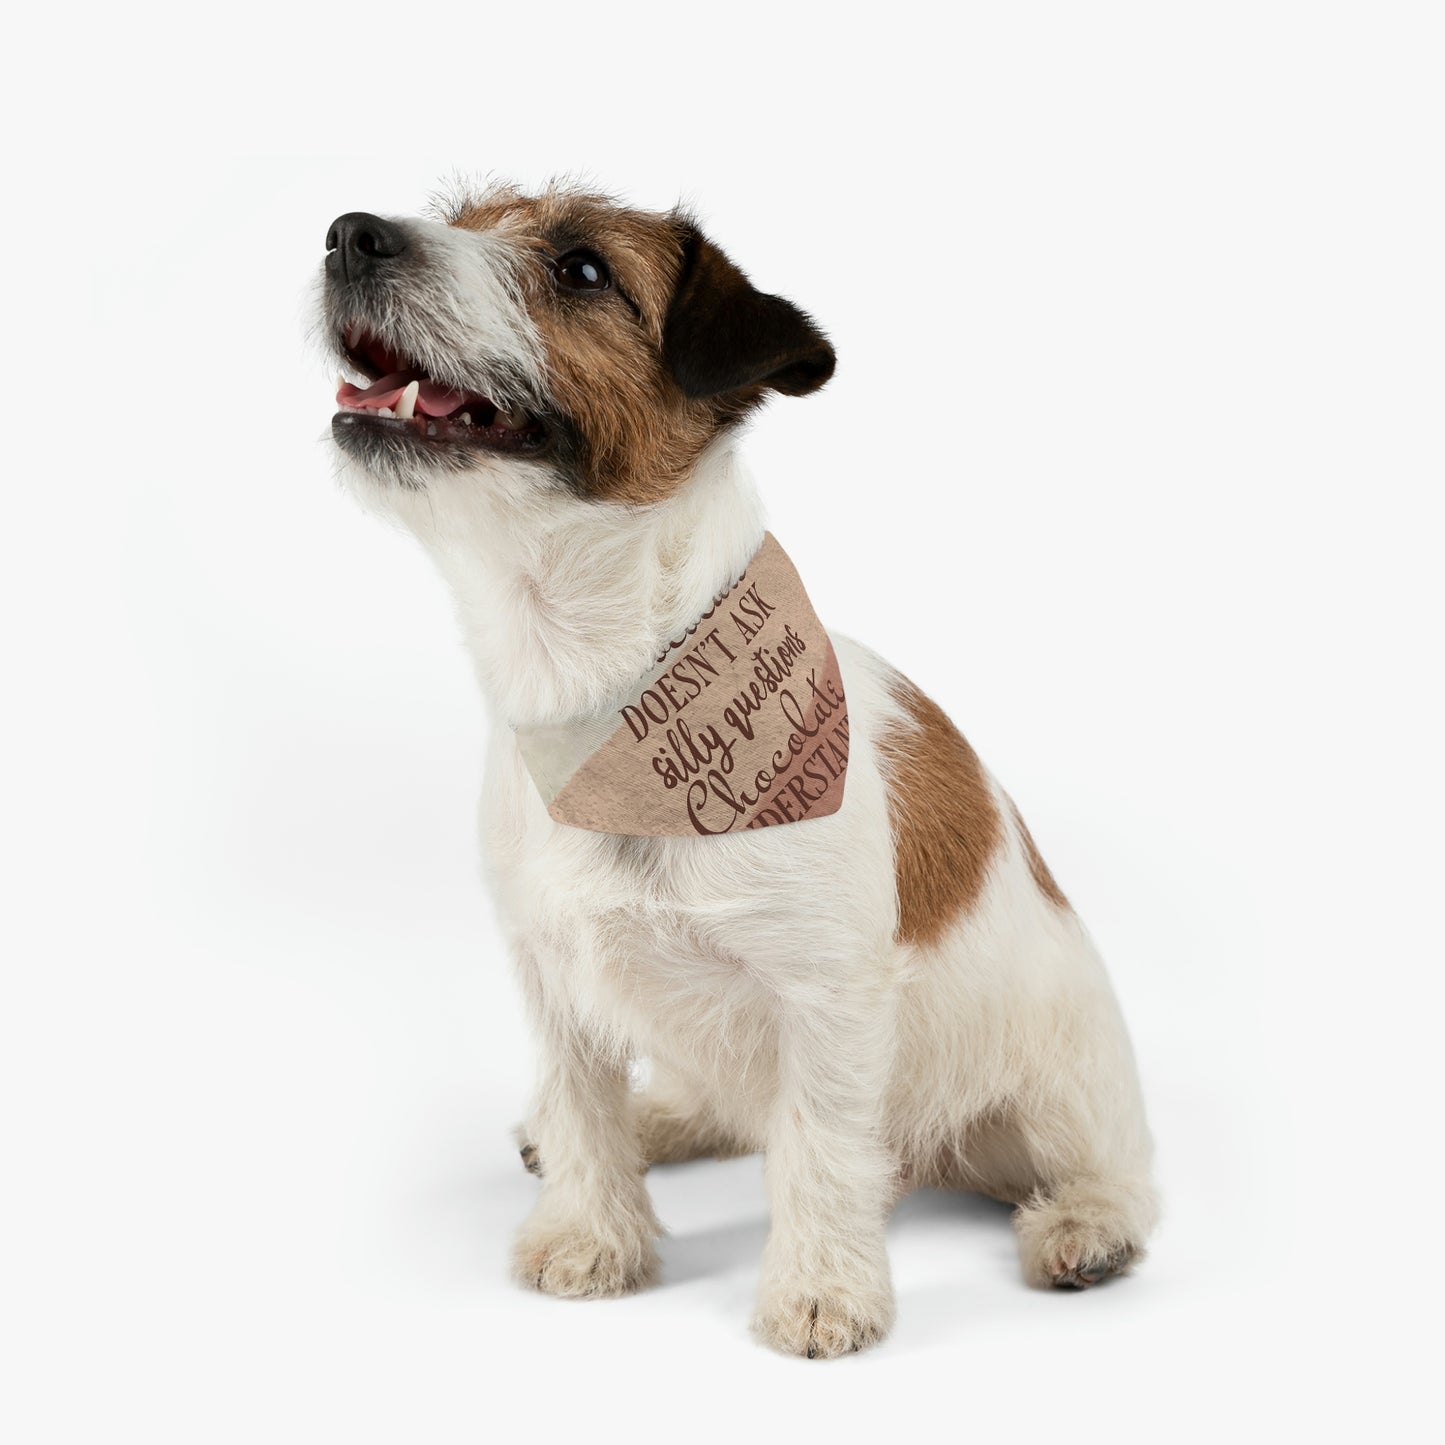 Chocolate Doesn’t Ask Questions Indulge in the Sweetness Pet Bandana Collar